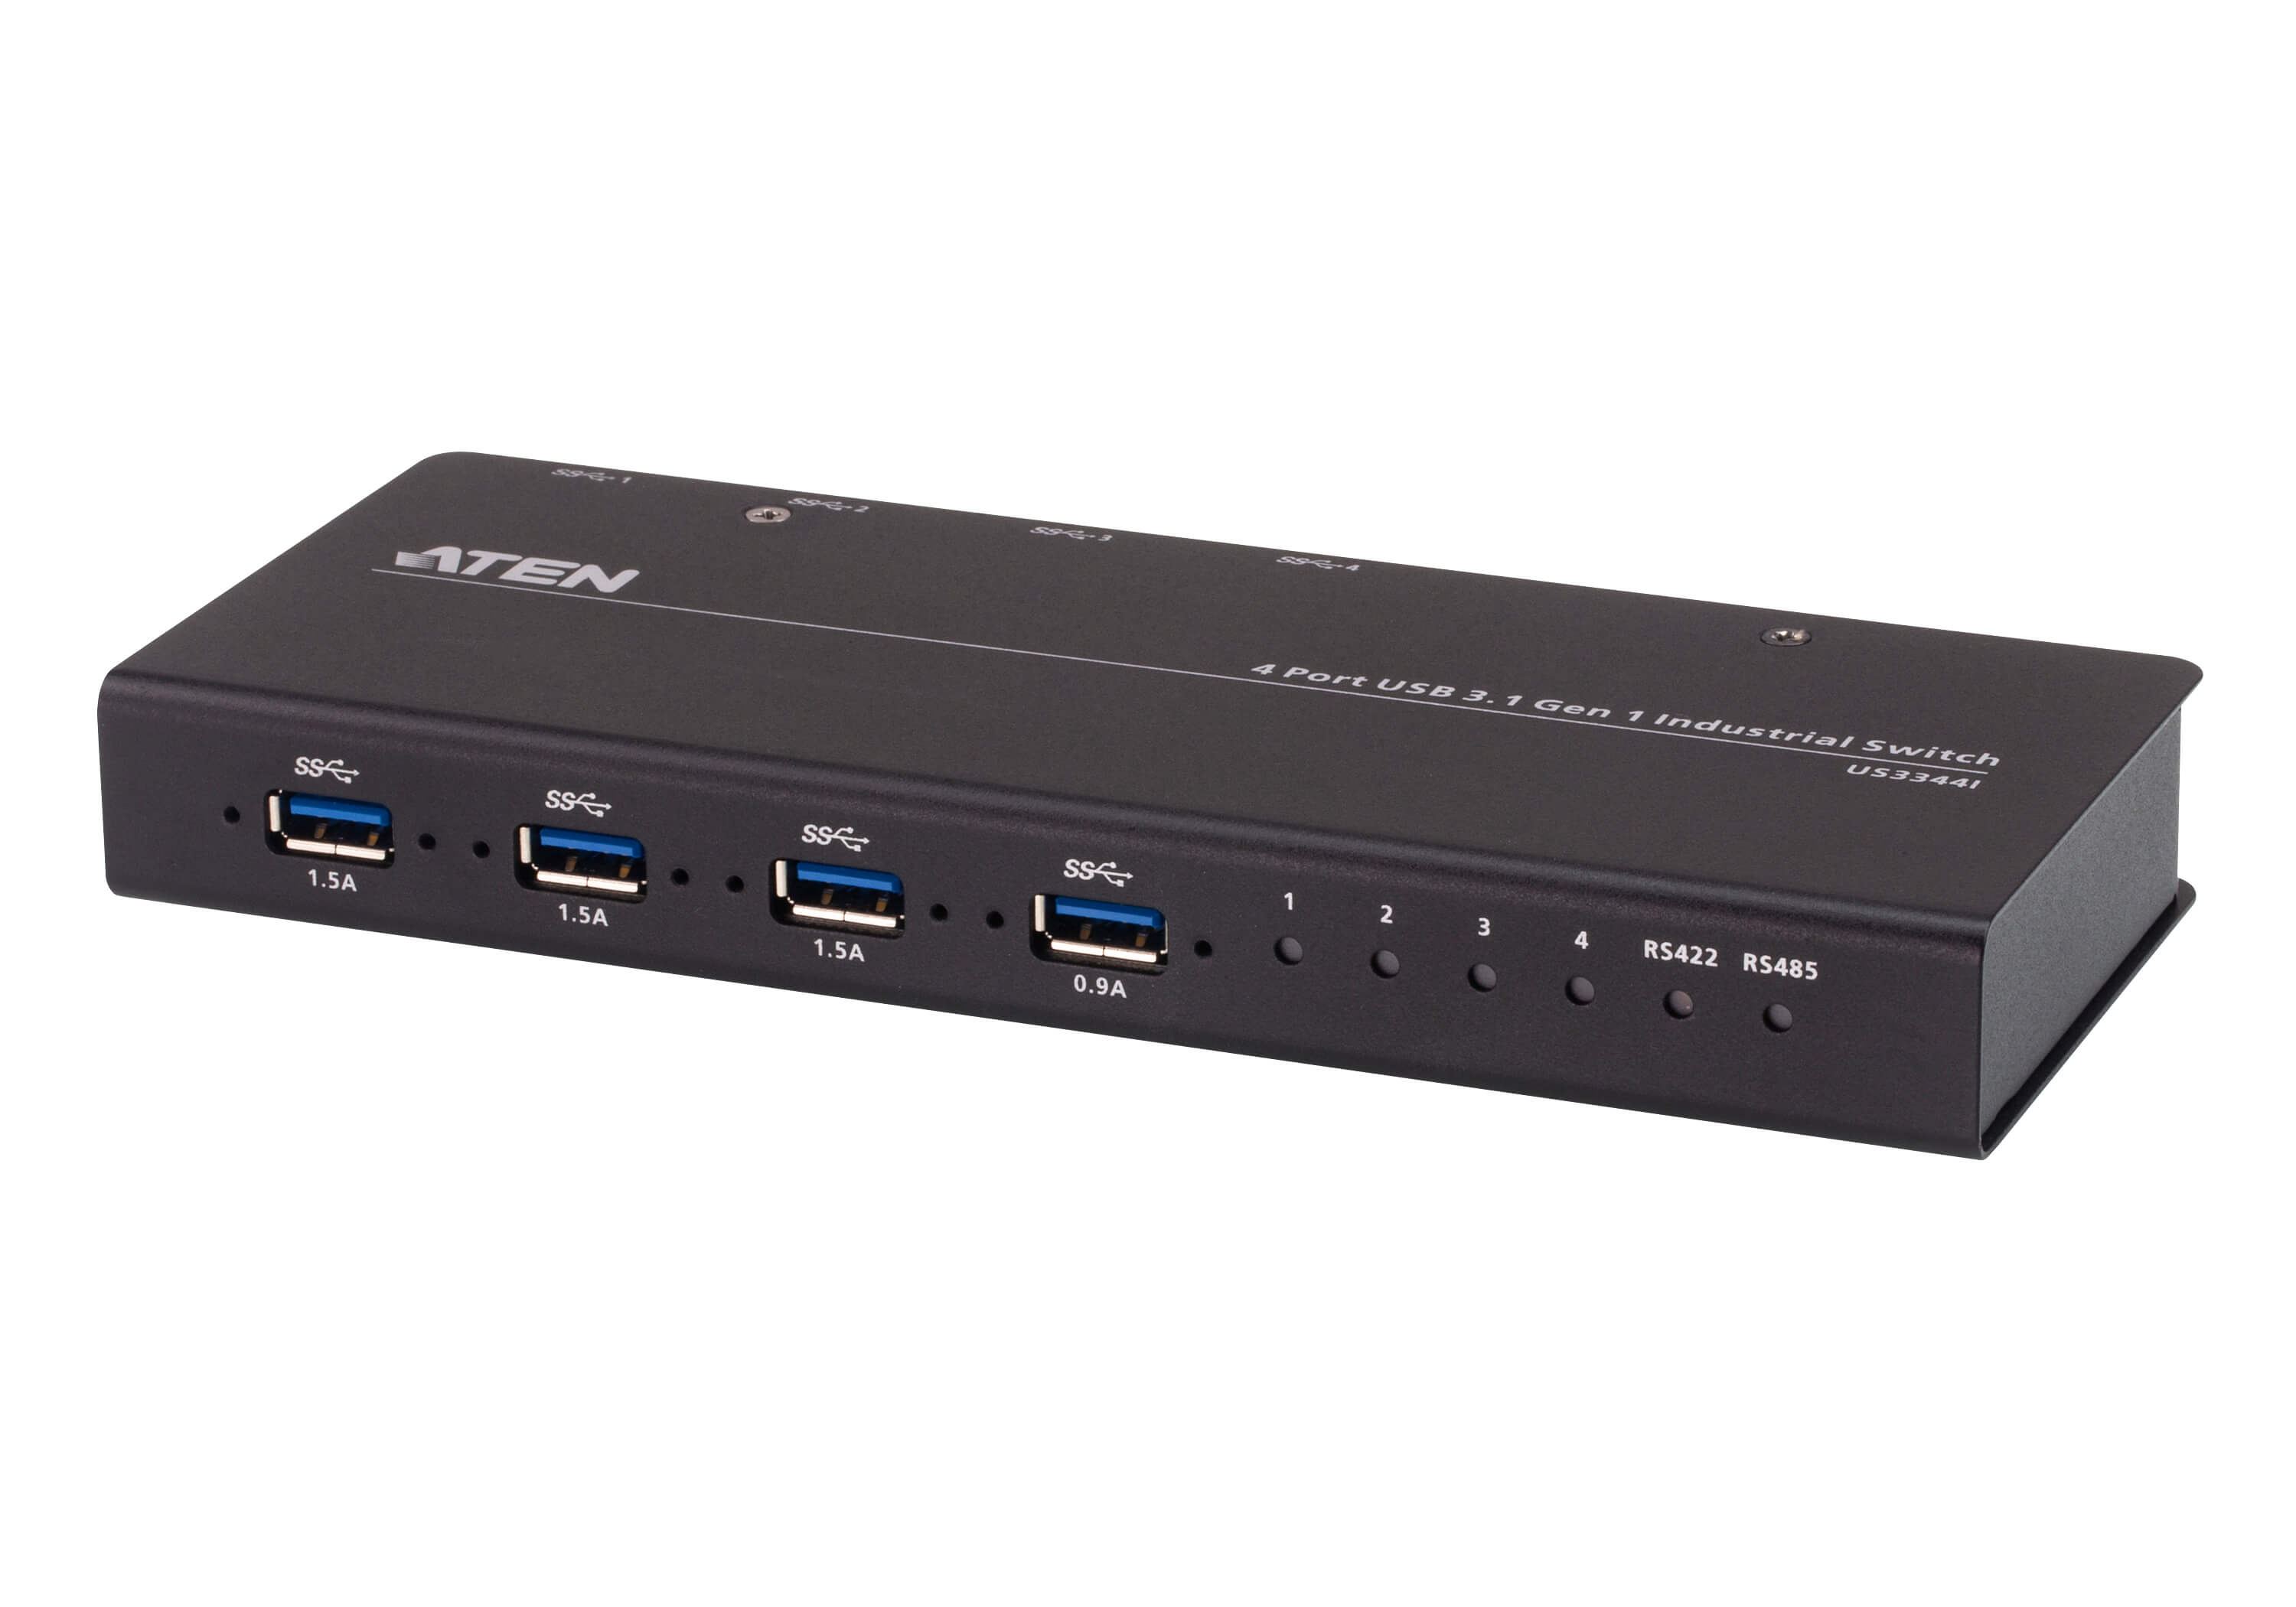 Aten Industrial Peripheral Switch 4x4 USB 3.1 Gen1, 4x Devices, 4x USB 3.1 Gen1 Ports, Remote Port Selector, Supports RS-422/RS485 Remote Controller